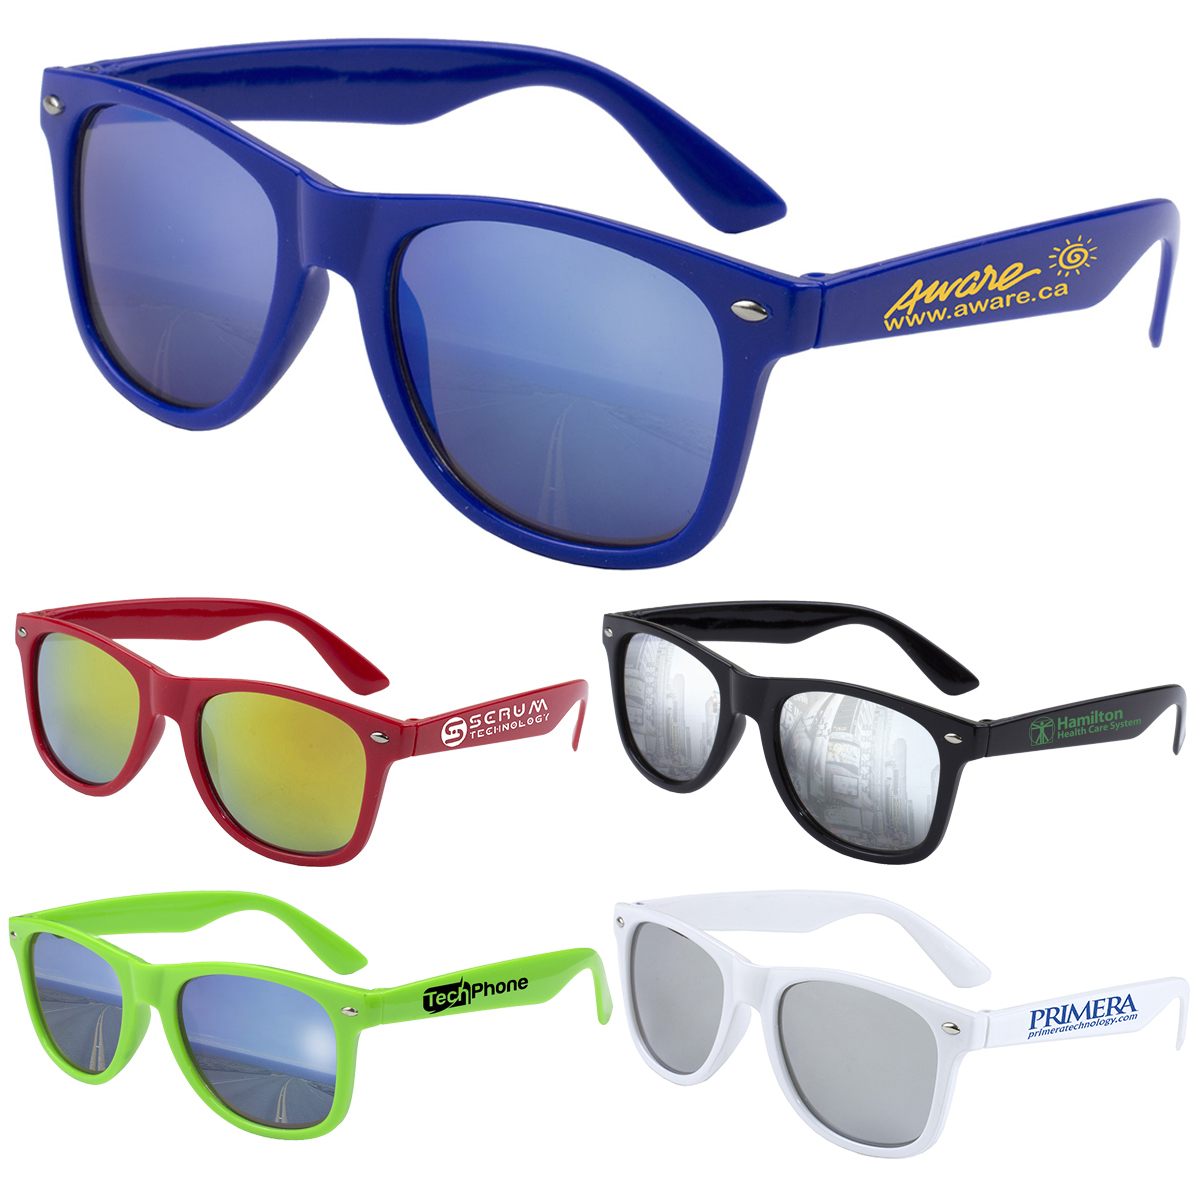 "Clairemont" Coloured Mirror Tint Lens Sunglasses with High Gloss Frame﻿